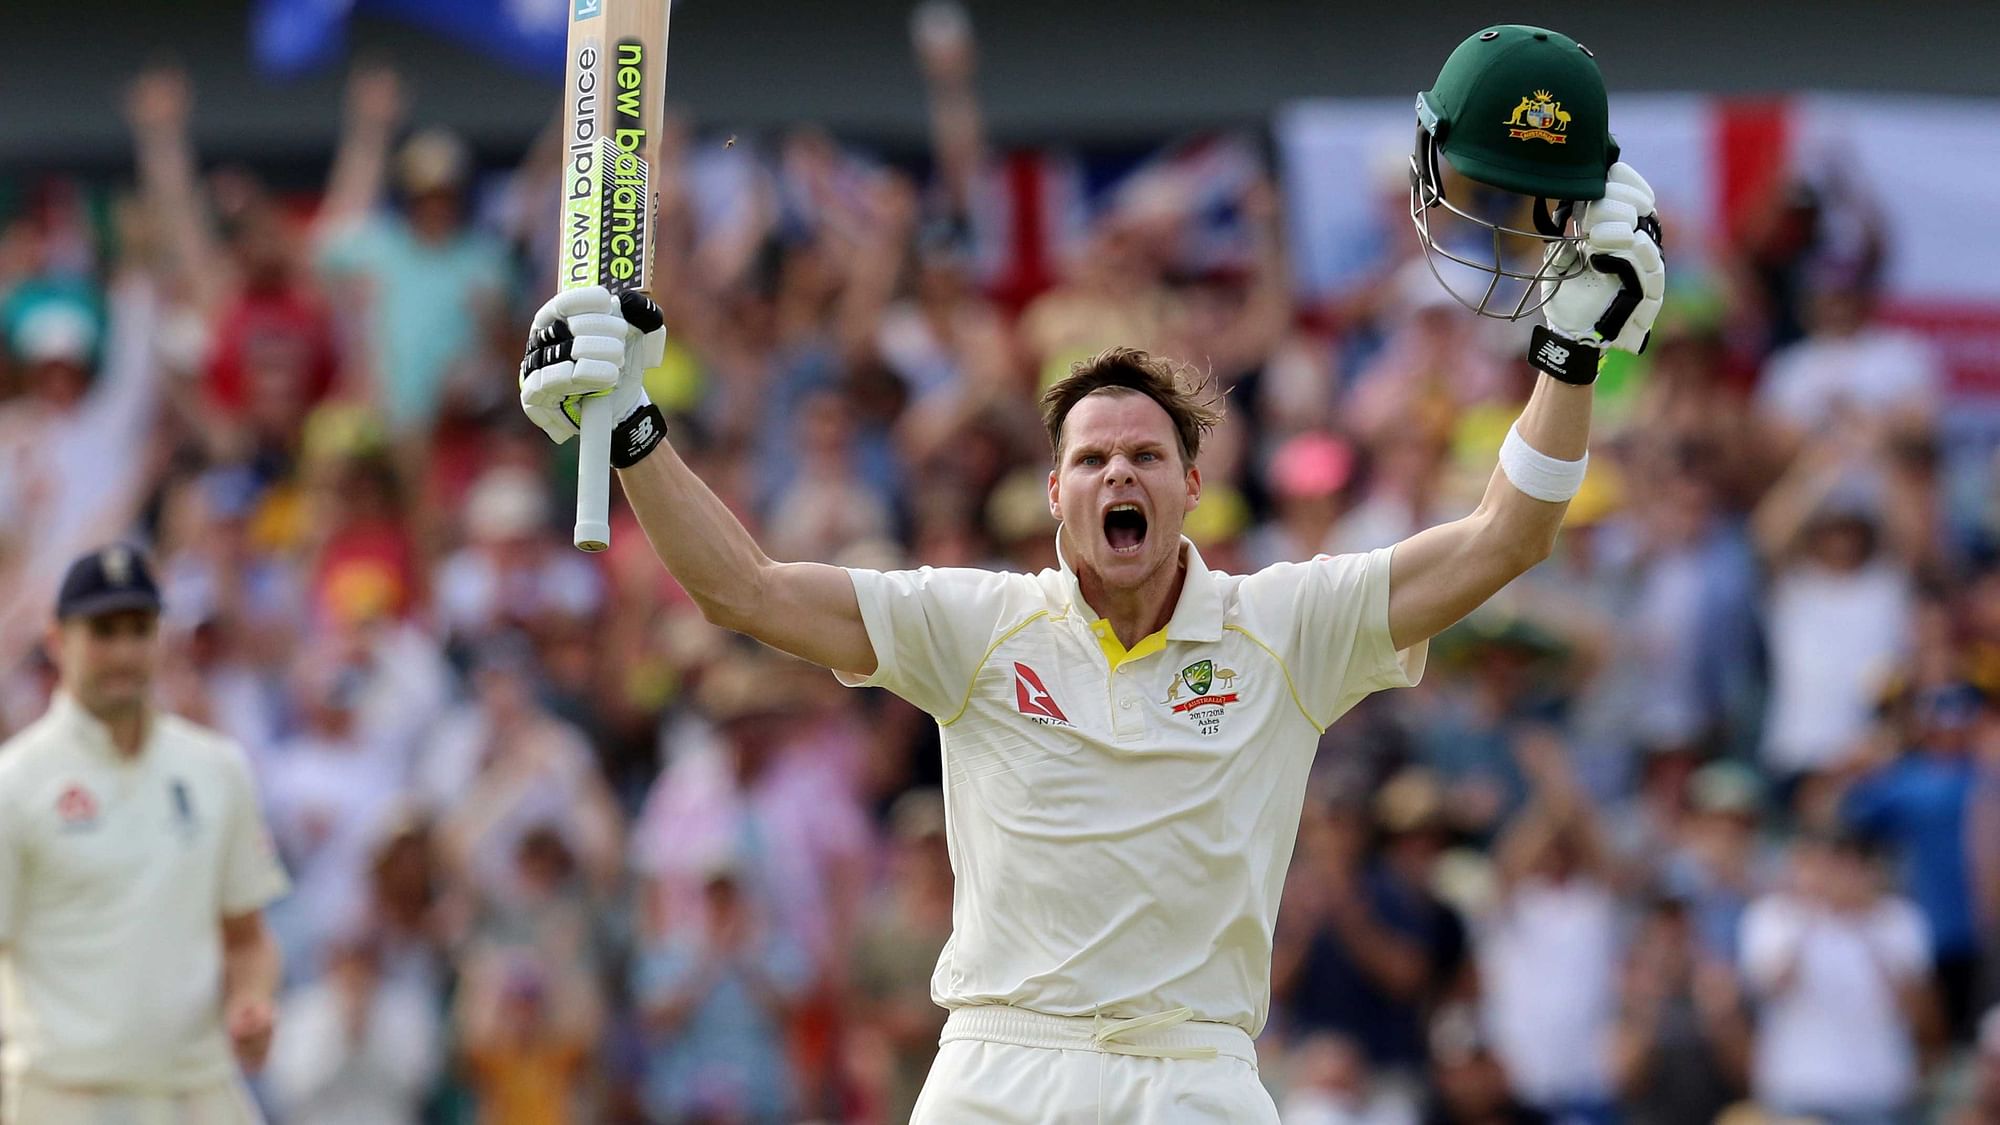 Steve Smith celebrates after scoring a double century on Day 3 of the Perth Test.